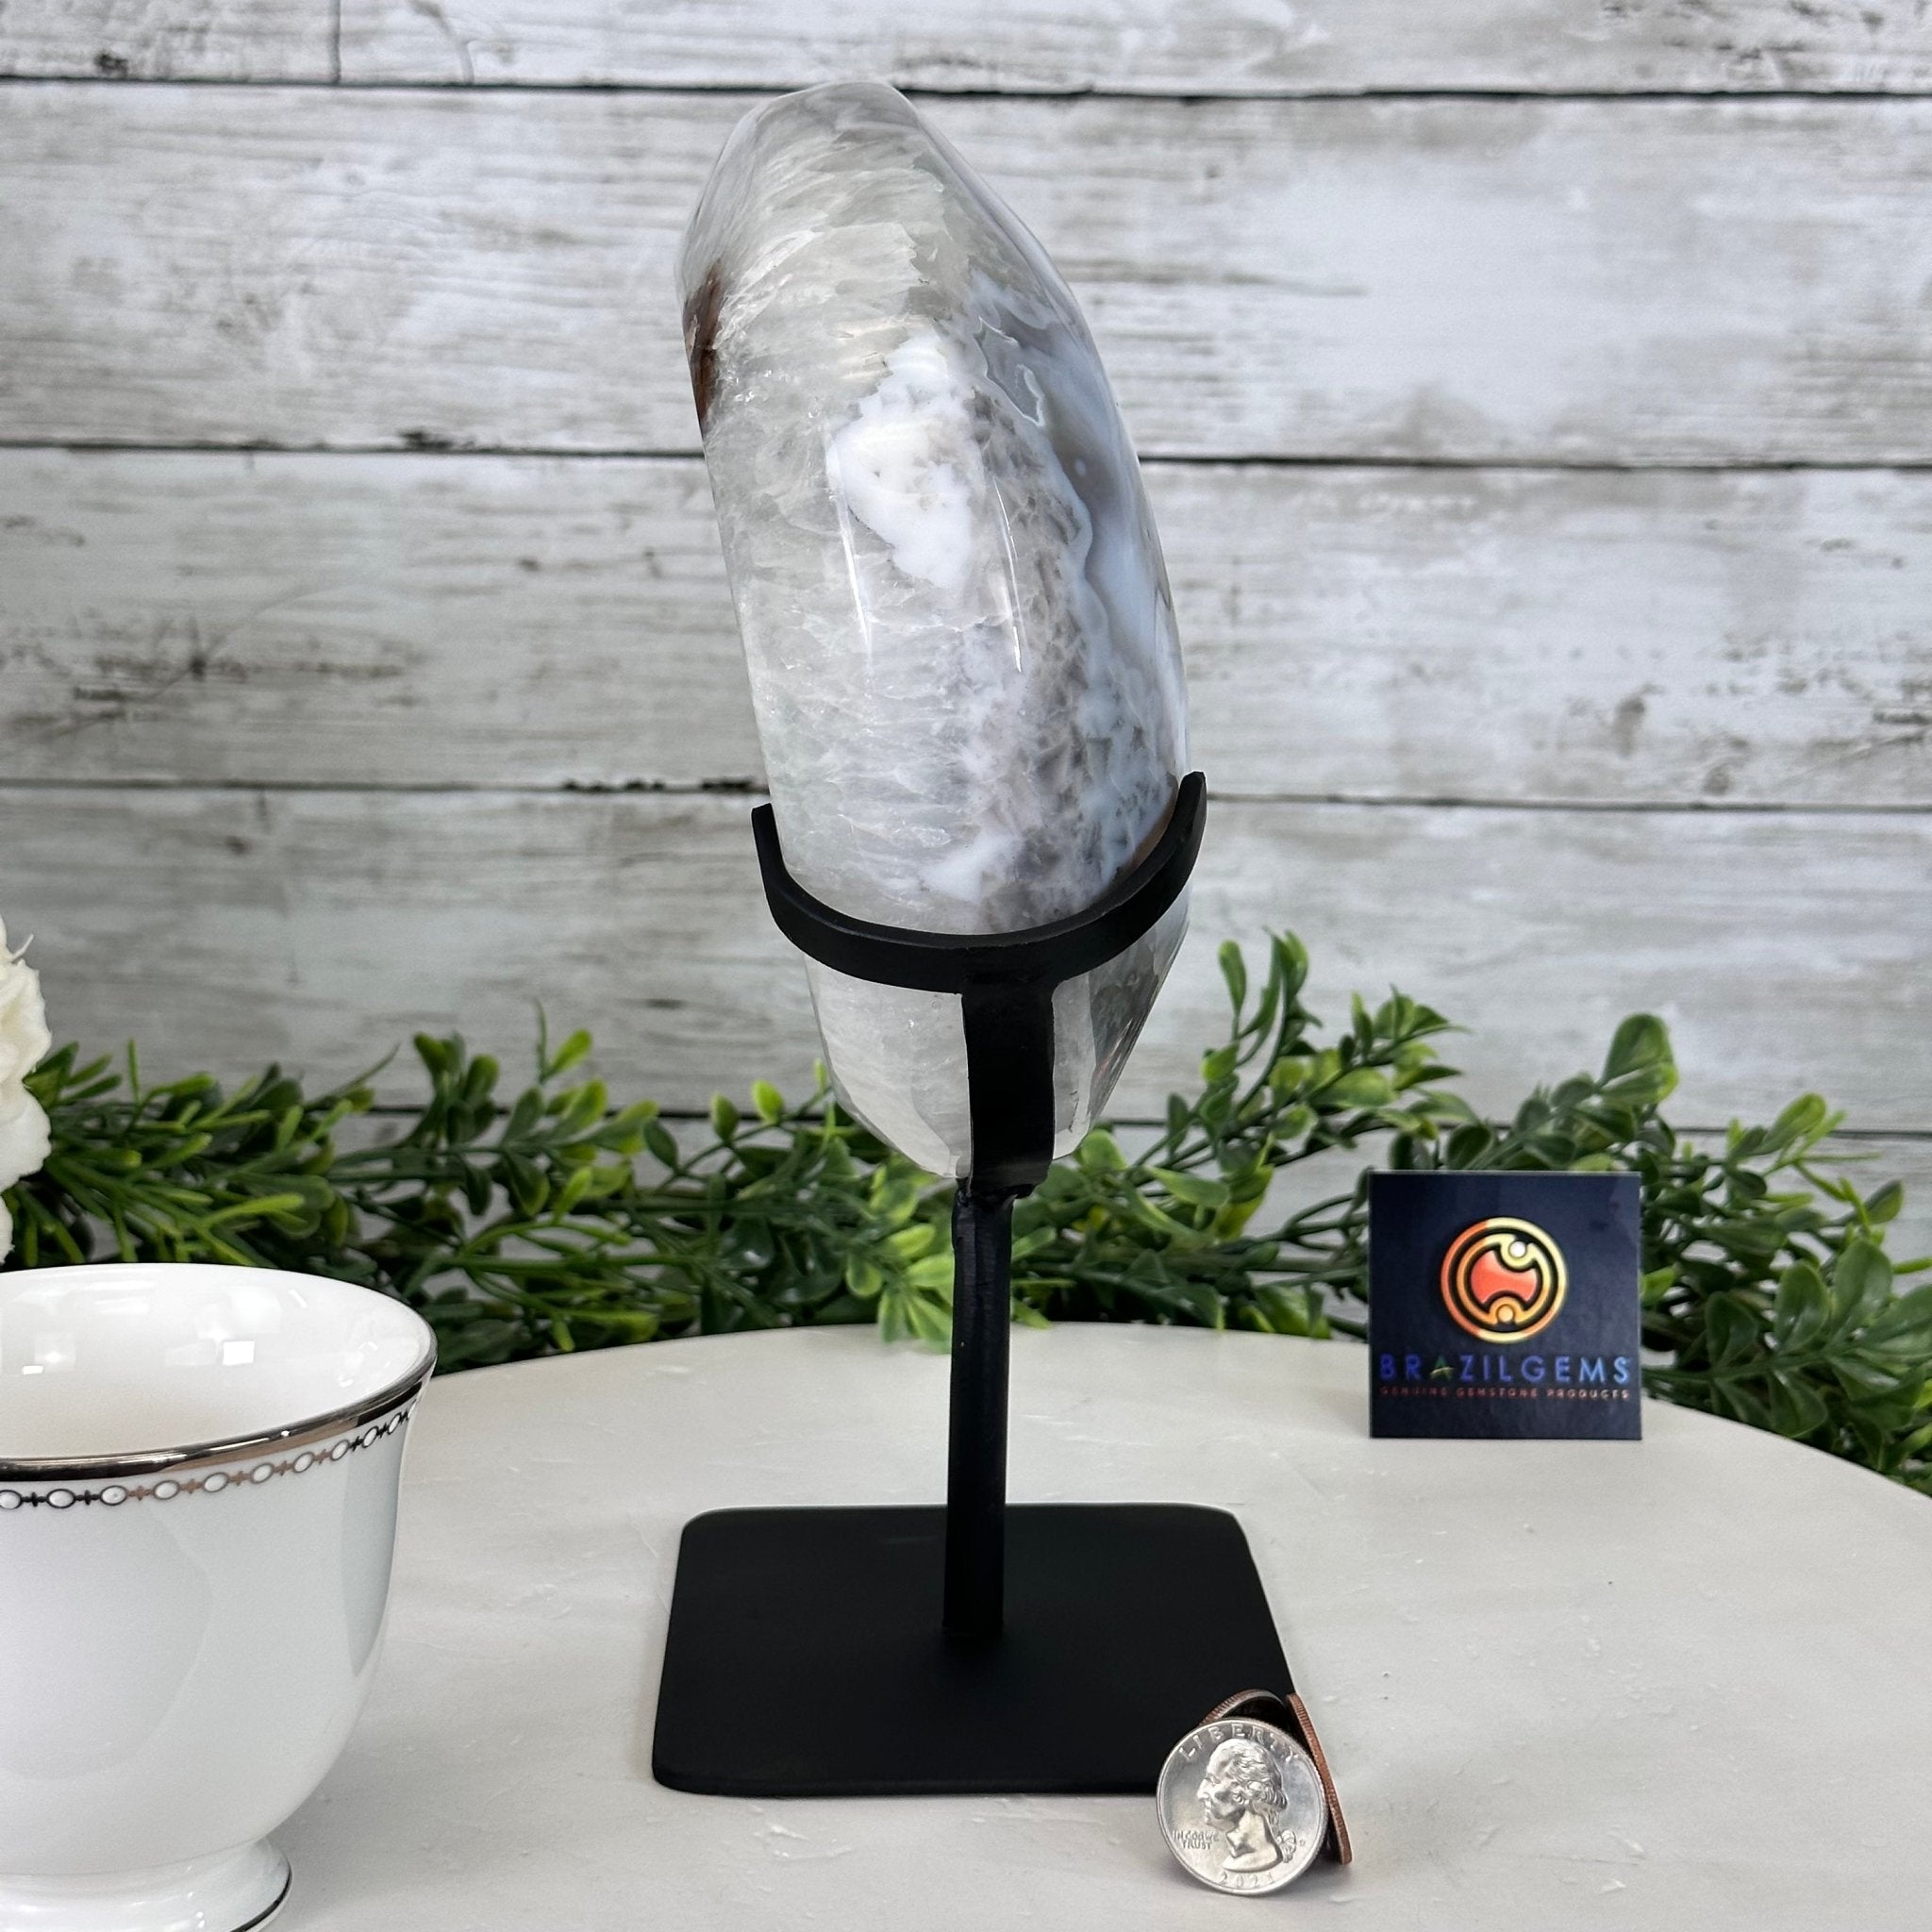 Polished Agate Crescent Moon on a Stand, 5.3 lbs & 9.8" Tall #5740NA-010 by Brazil Gems - Brazil GemsBrazil GemsPolished Agate Crescent Moon on a Stand, 5.3 lbs & 9.8" Tall #5740NA-010 by Brazil GemsCrescent Moons5740NA-010